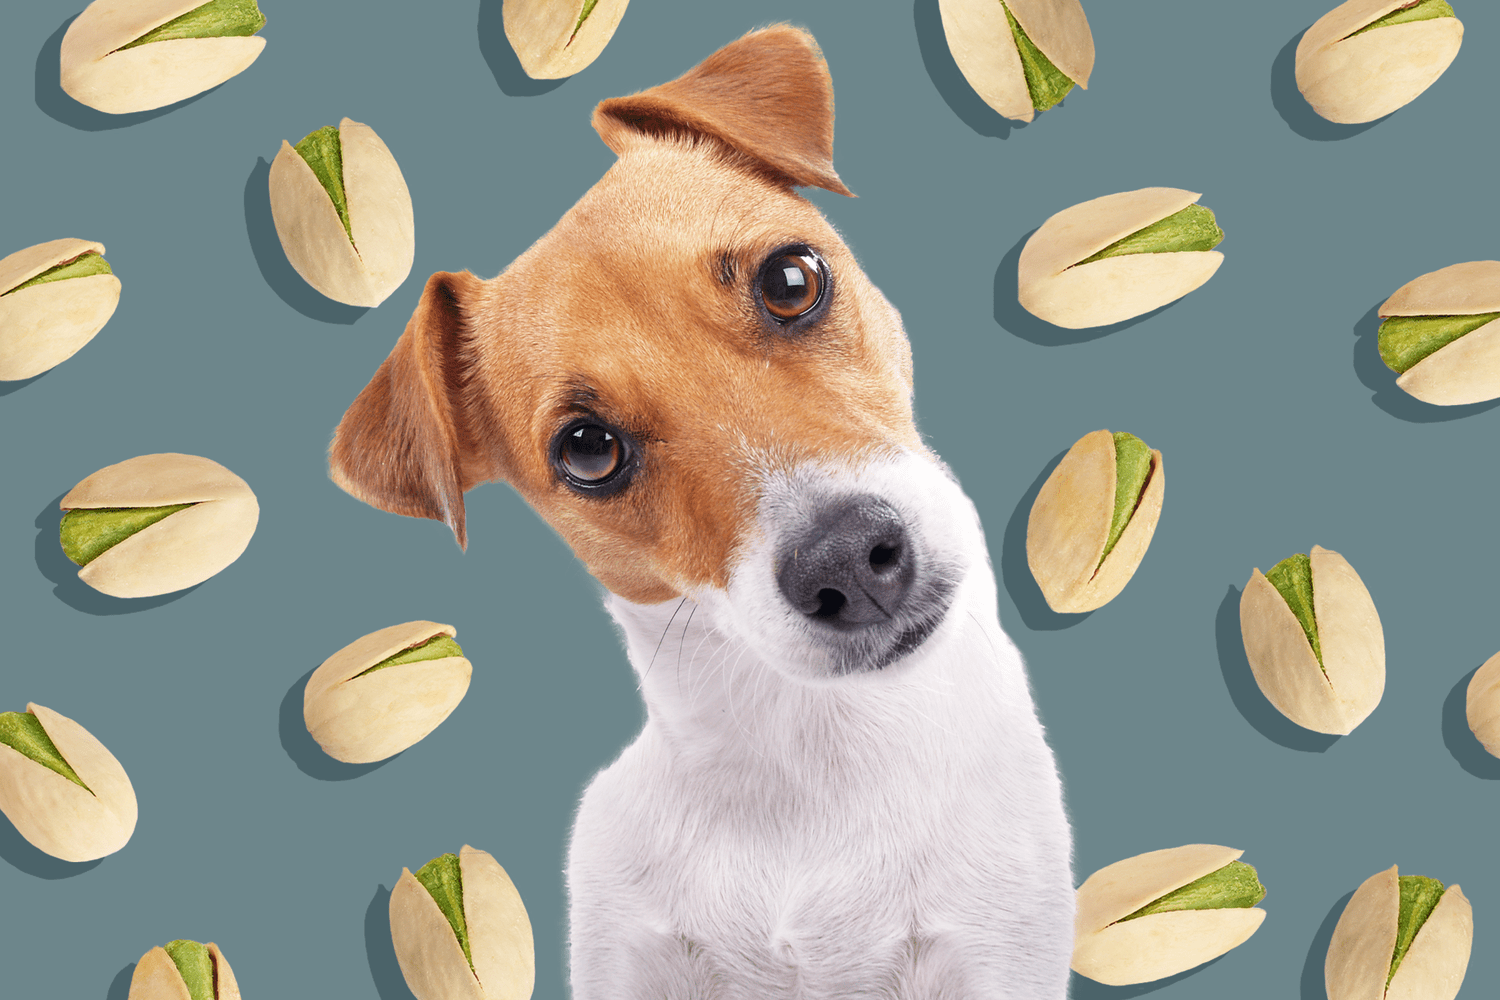 dog with a background of a pistachio pattern; can dogs eat pistachios?